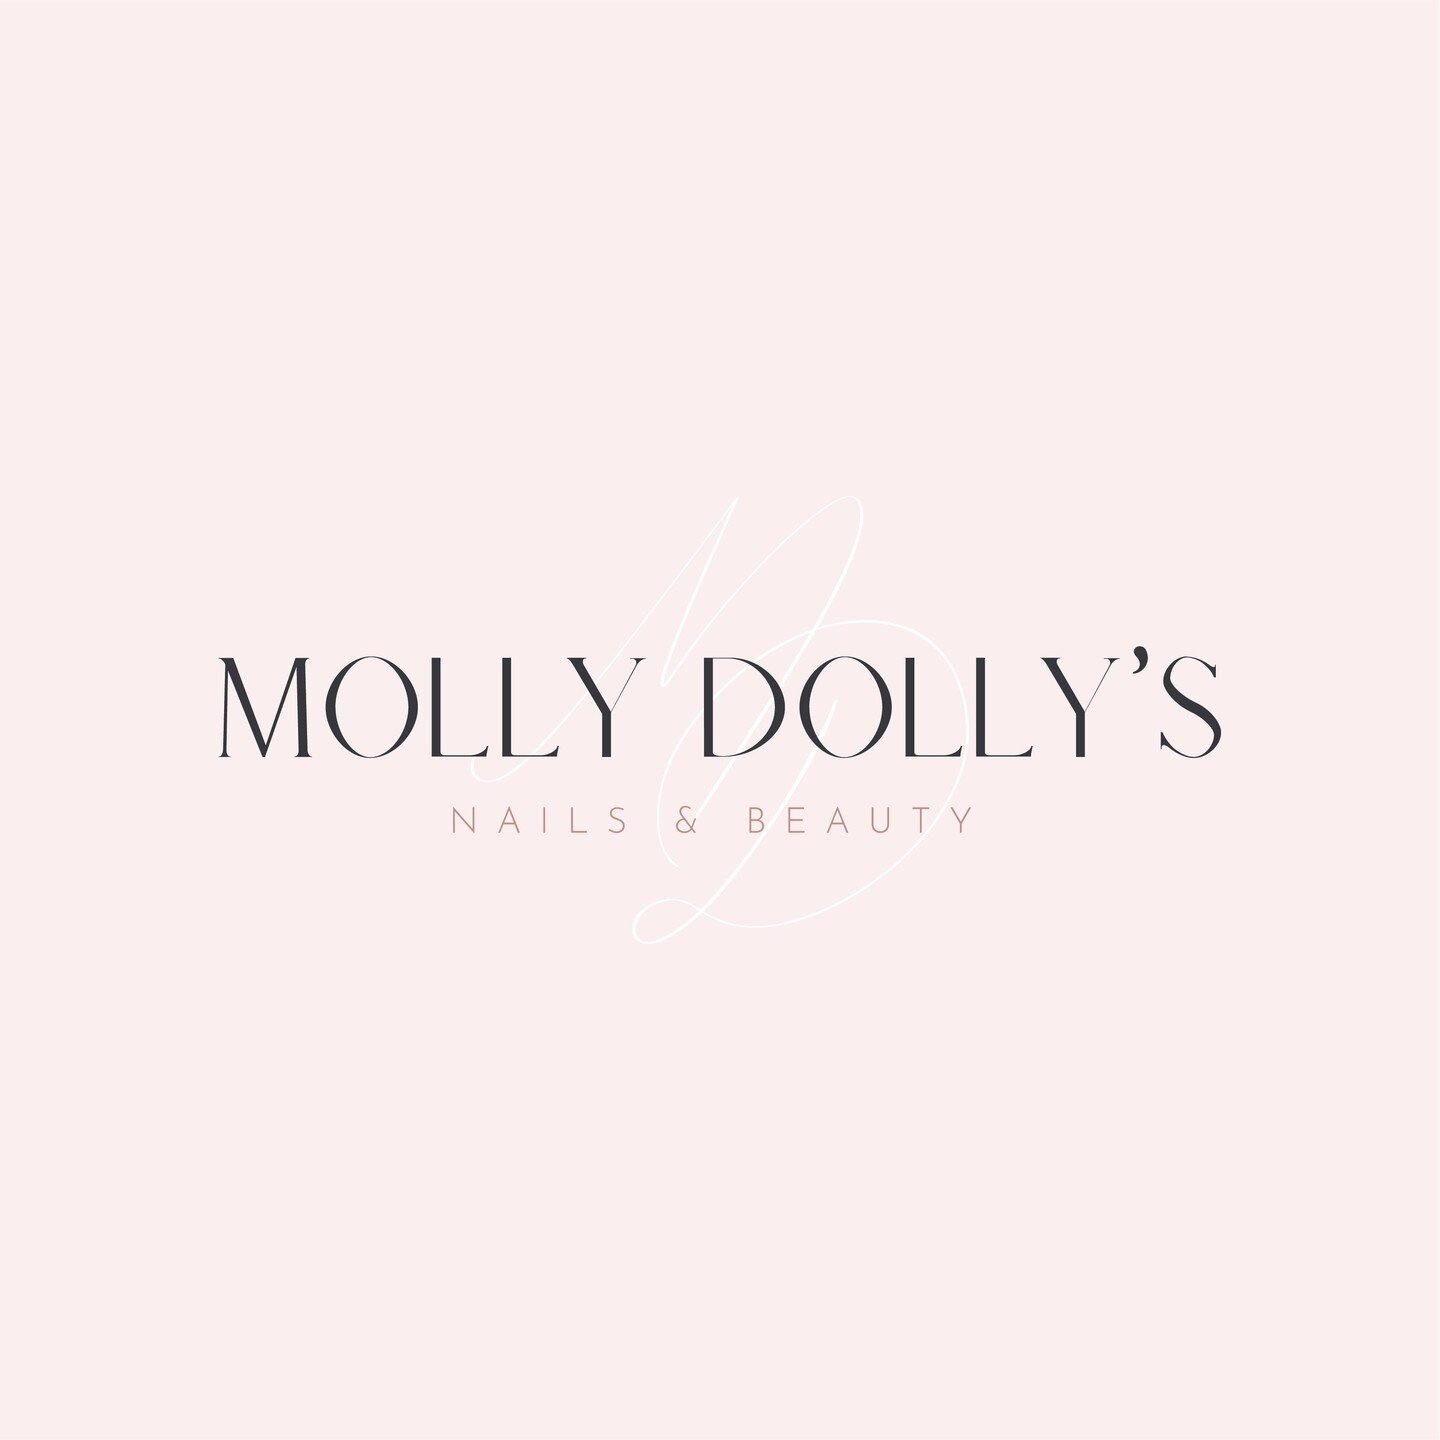 Molly Dolly's Nails &amp; Beauty ✨ 

I&rsquo;ve been working with Molly on this pretty, sophisticated branding for her new business venture. 

Fill out the enquiry form linked in bio to start your branding journey today📩
 
#branding #brandingdesign 